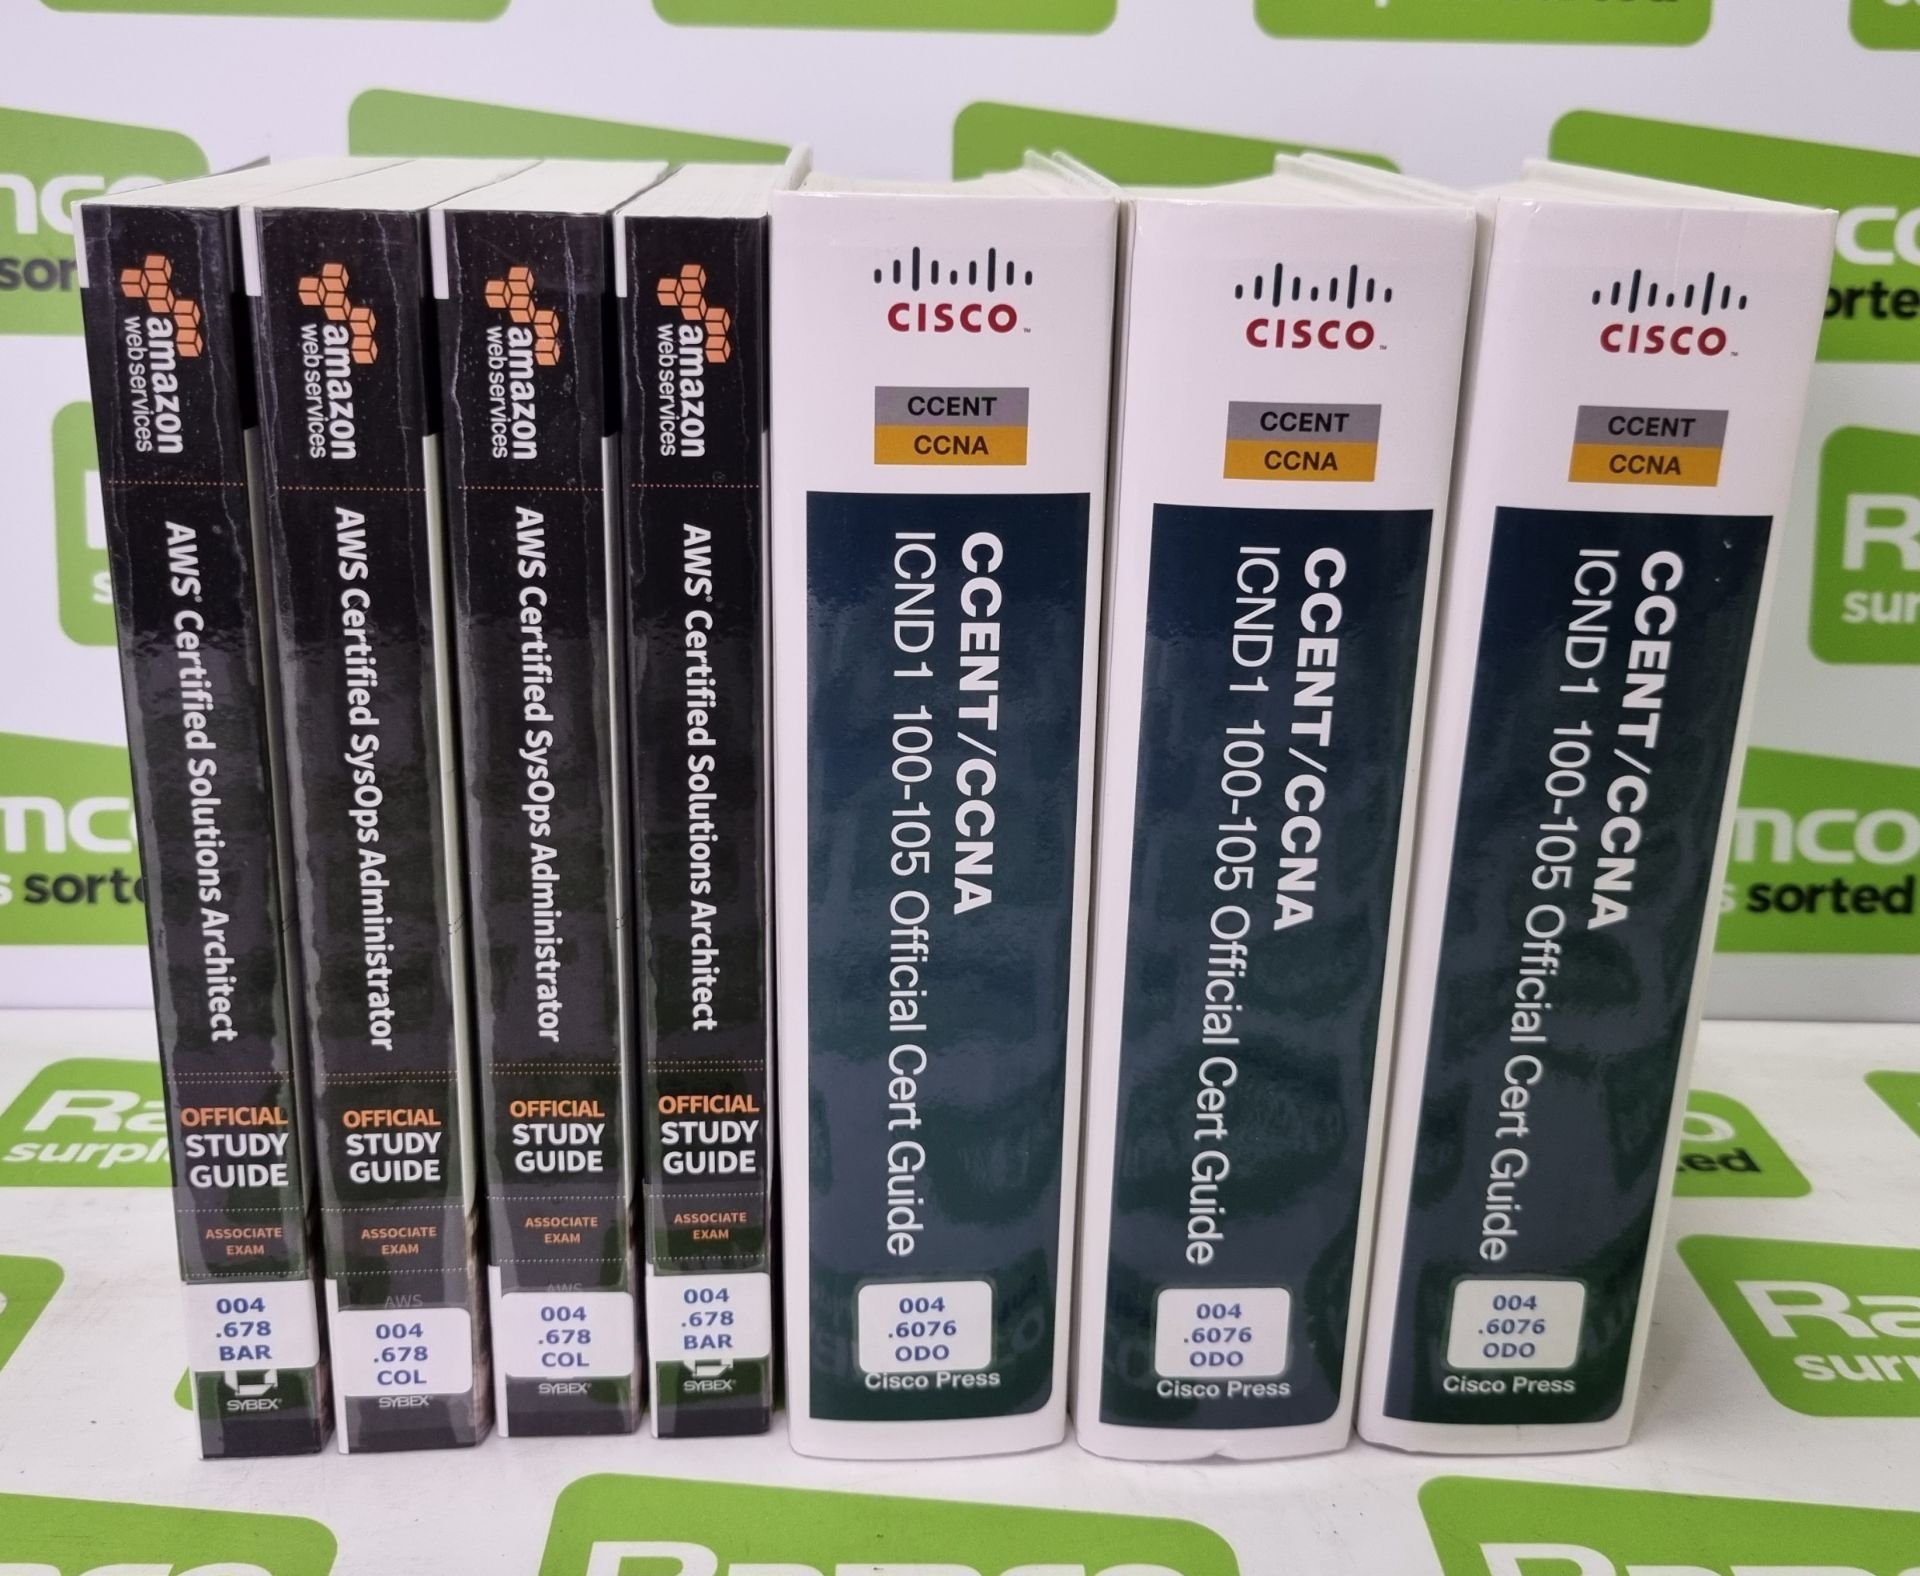 3x CCENT/CCNA ICND1 100-105 Official Cert Guide, 2x AWS Certified SysOps Administrator Official Stud